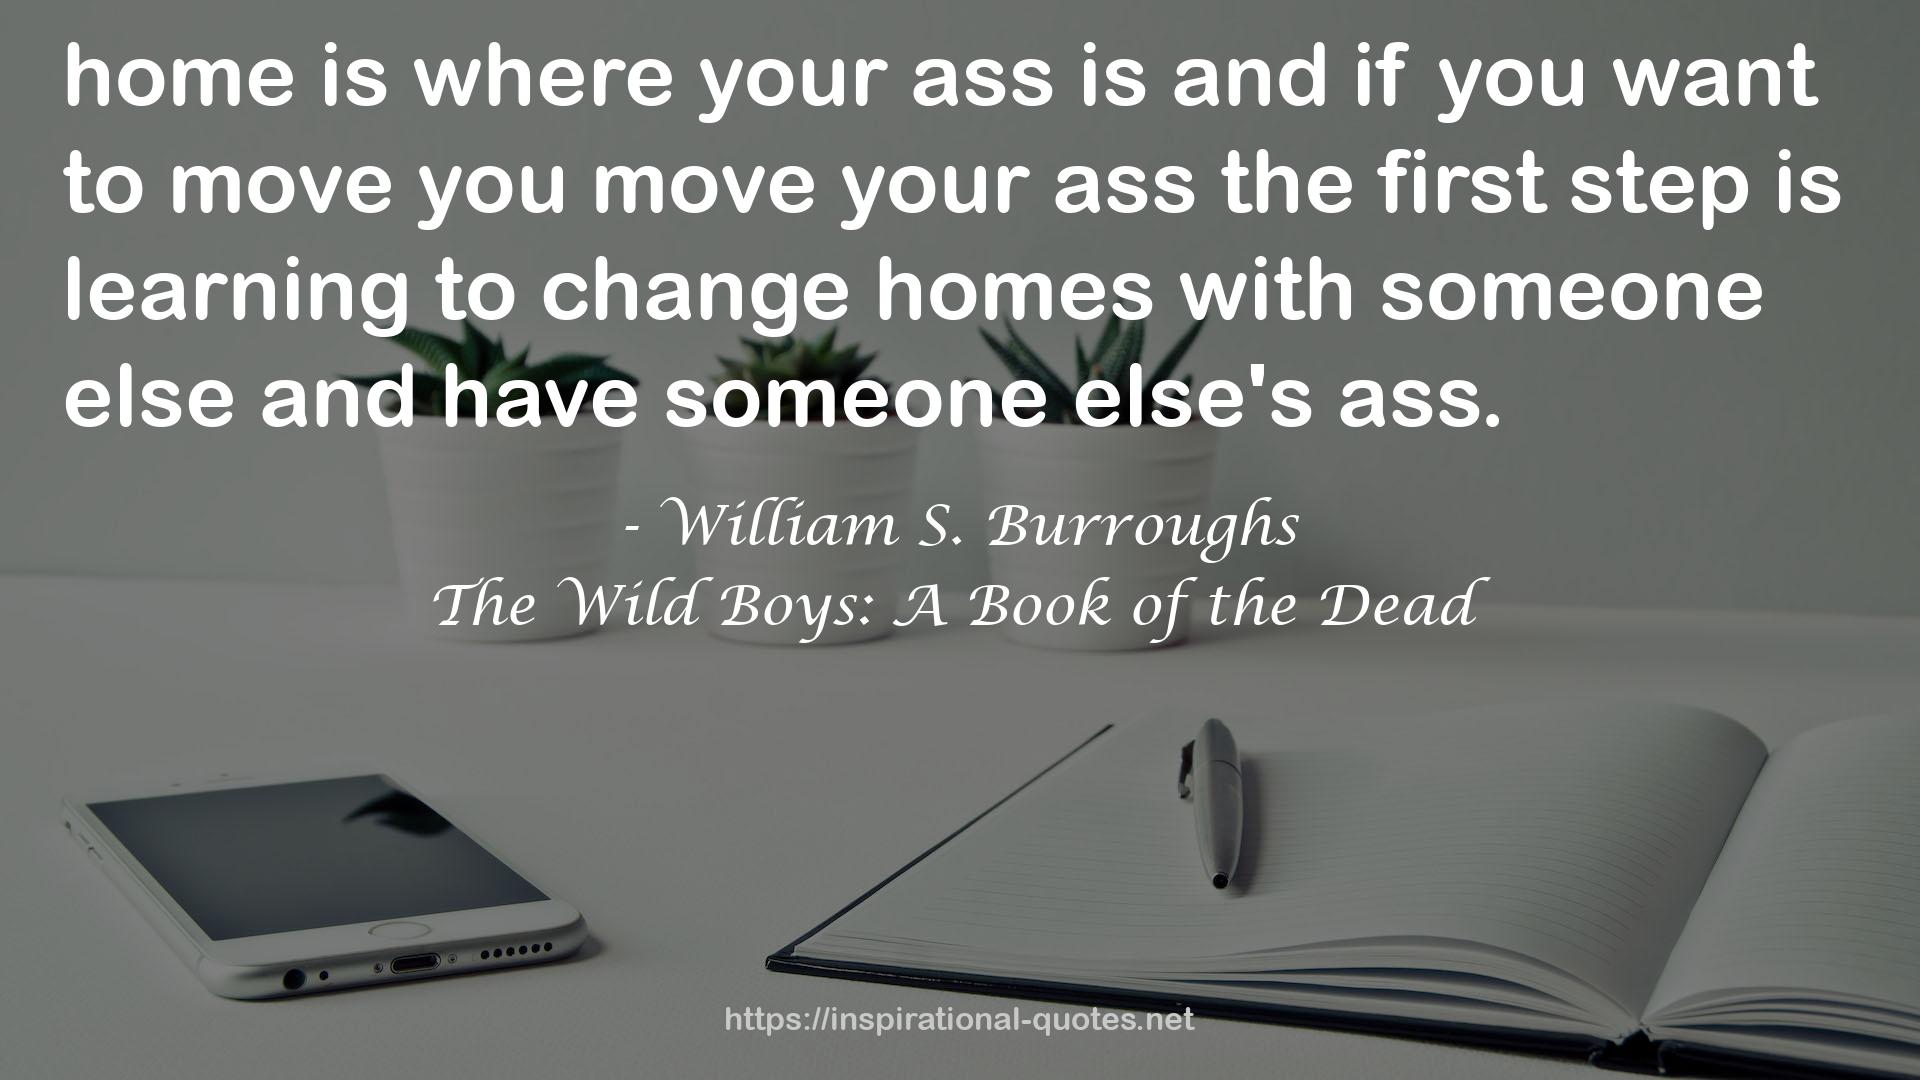 The Wild Boys: A Book of the Dead QUOTES